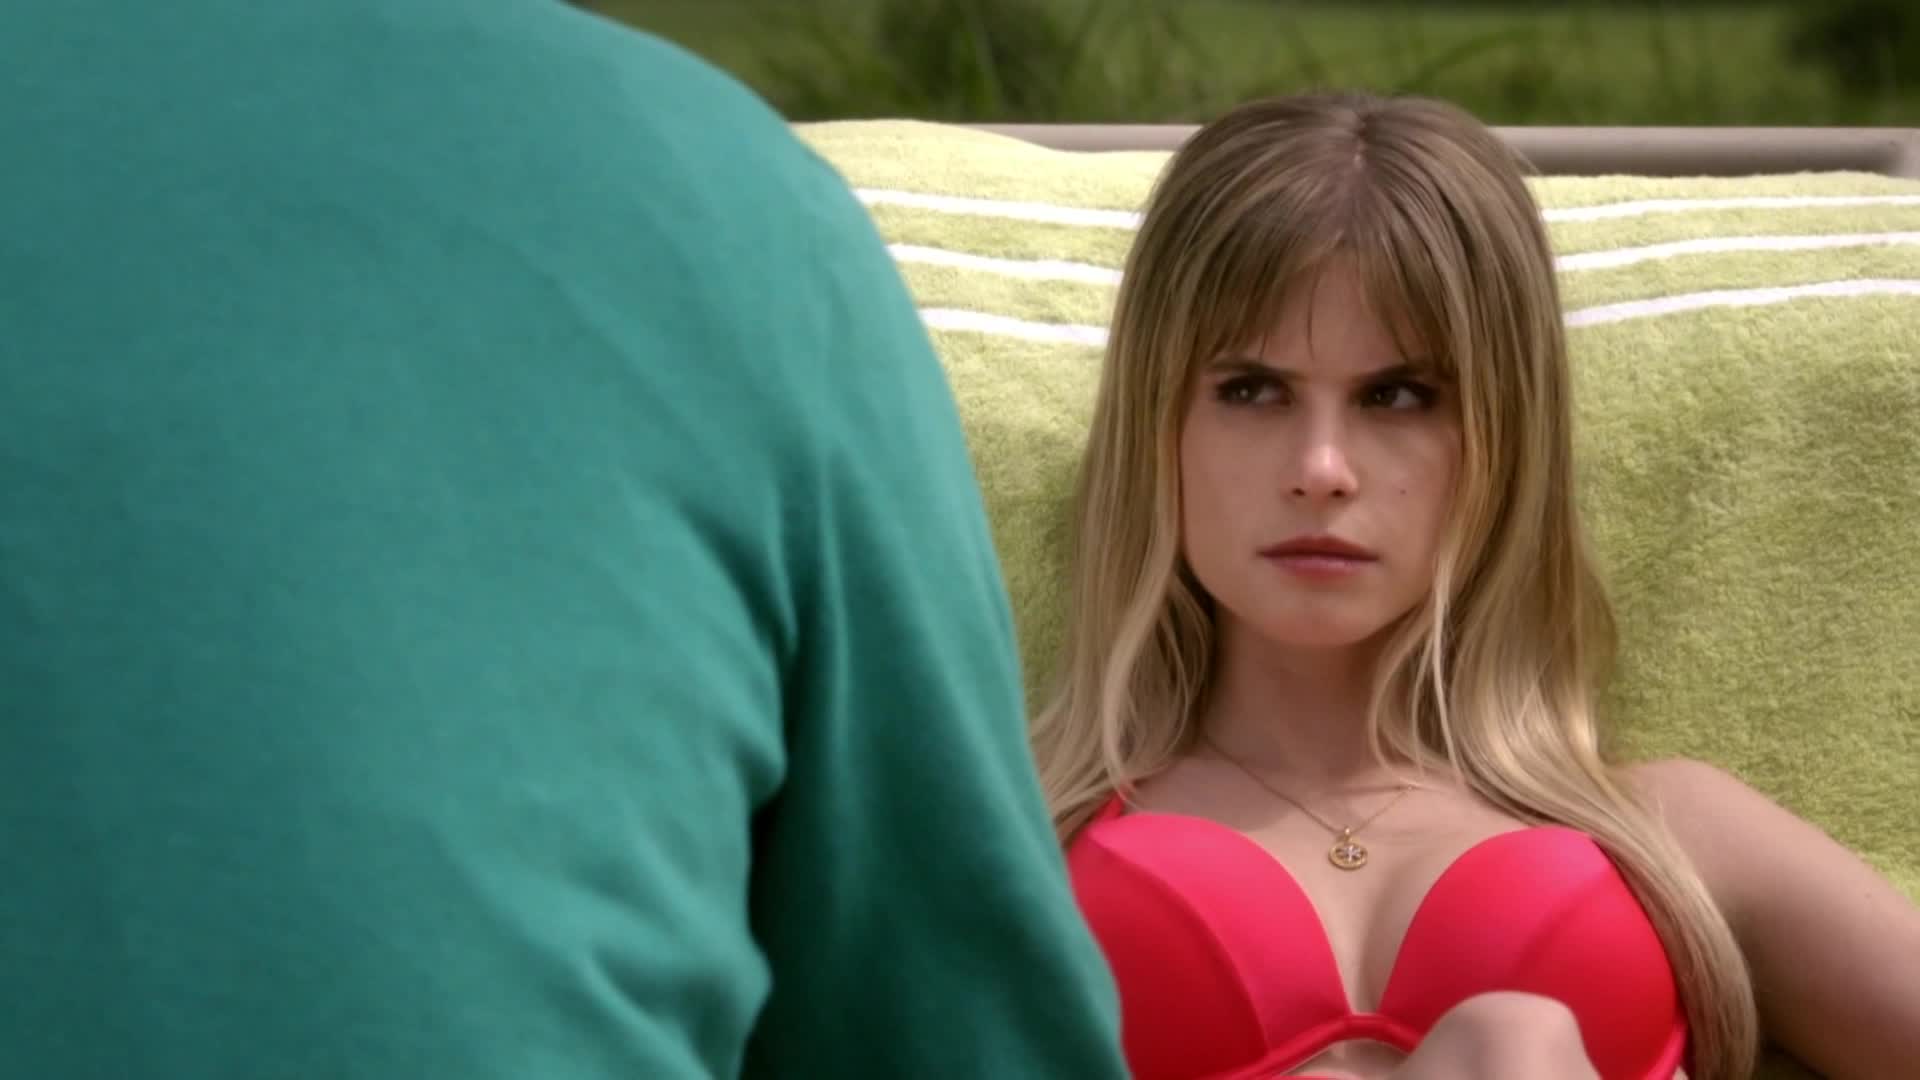 Carlson Young nude pics.